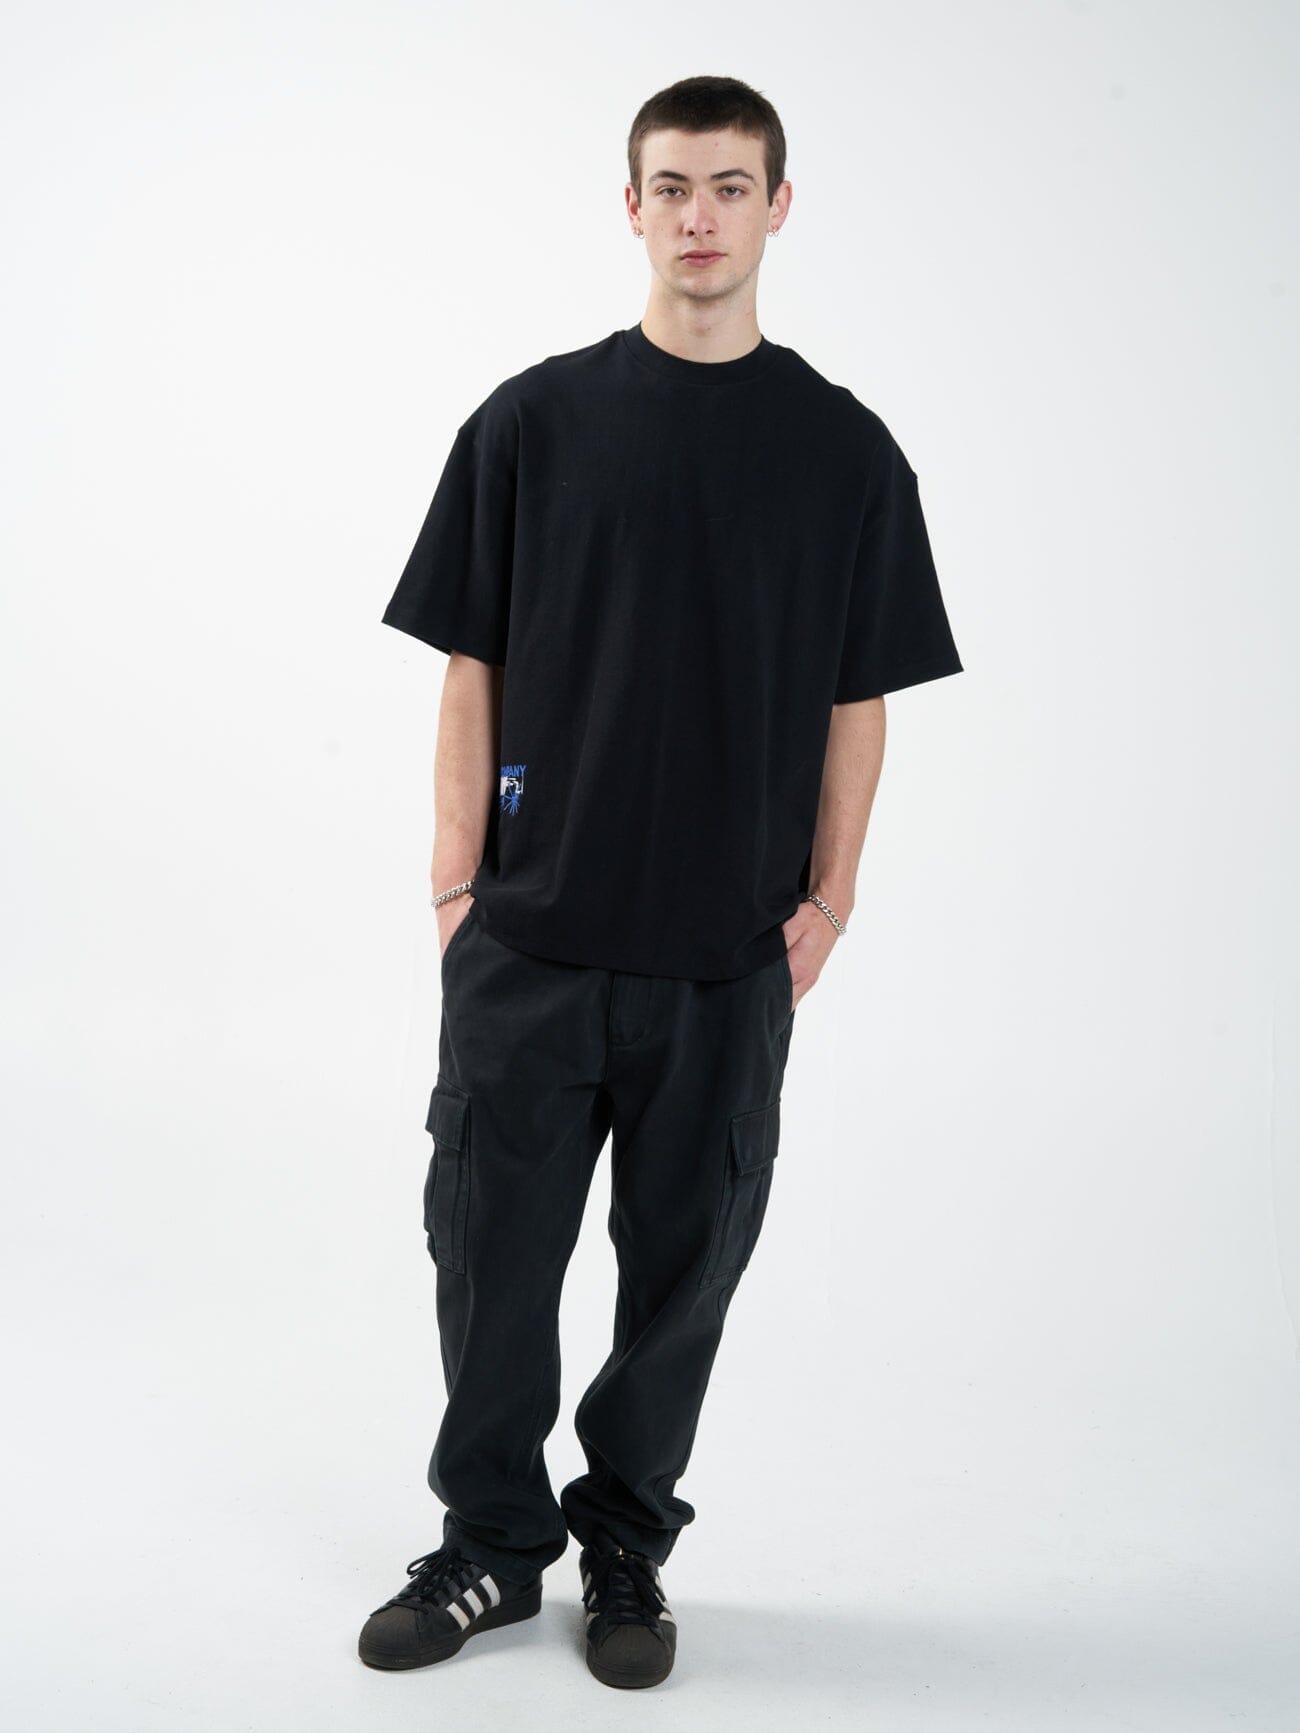 All Power Oversized Fit Tee - Black